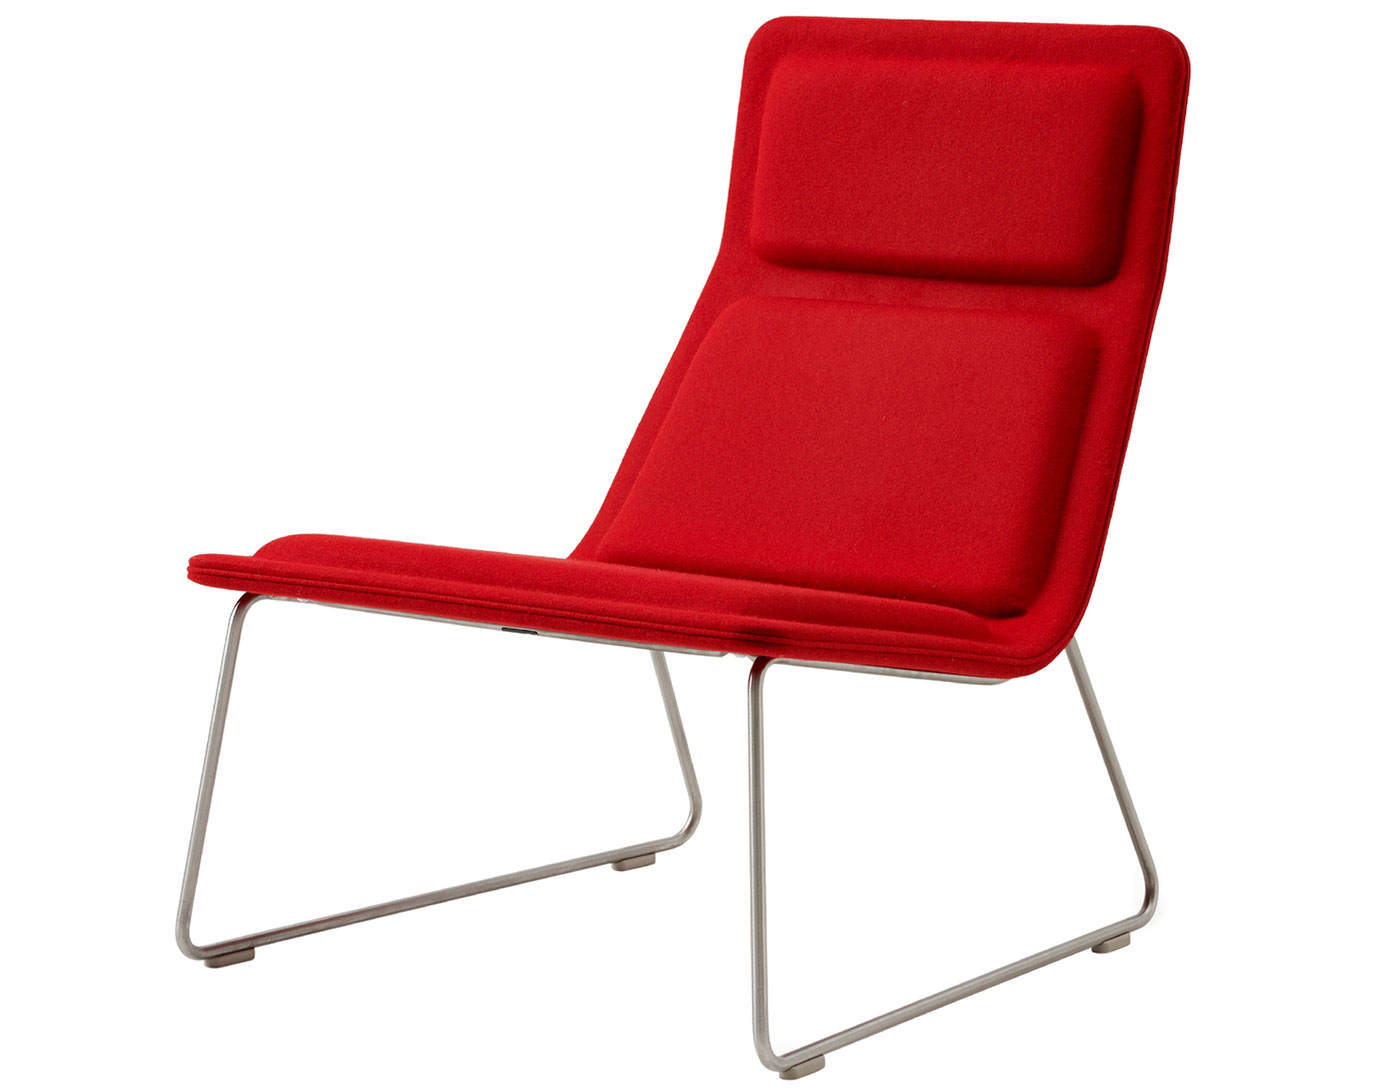 Low Pad Lounge Chair by Jasper Morrison for Cappellini | hive